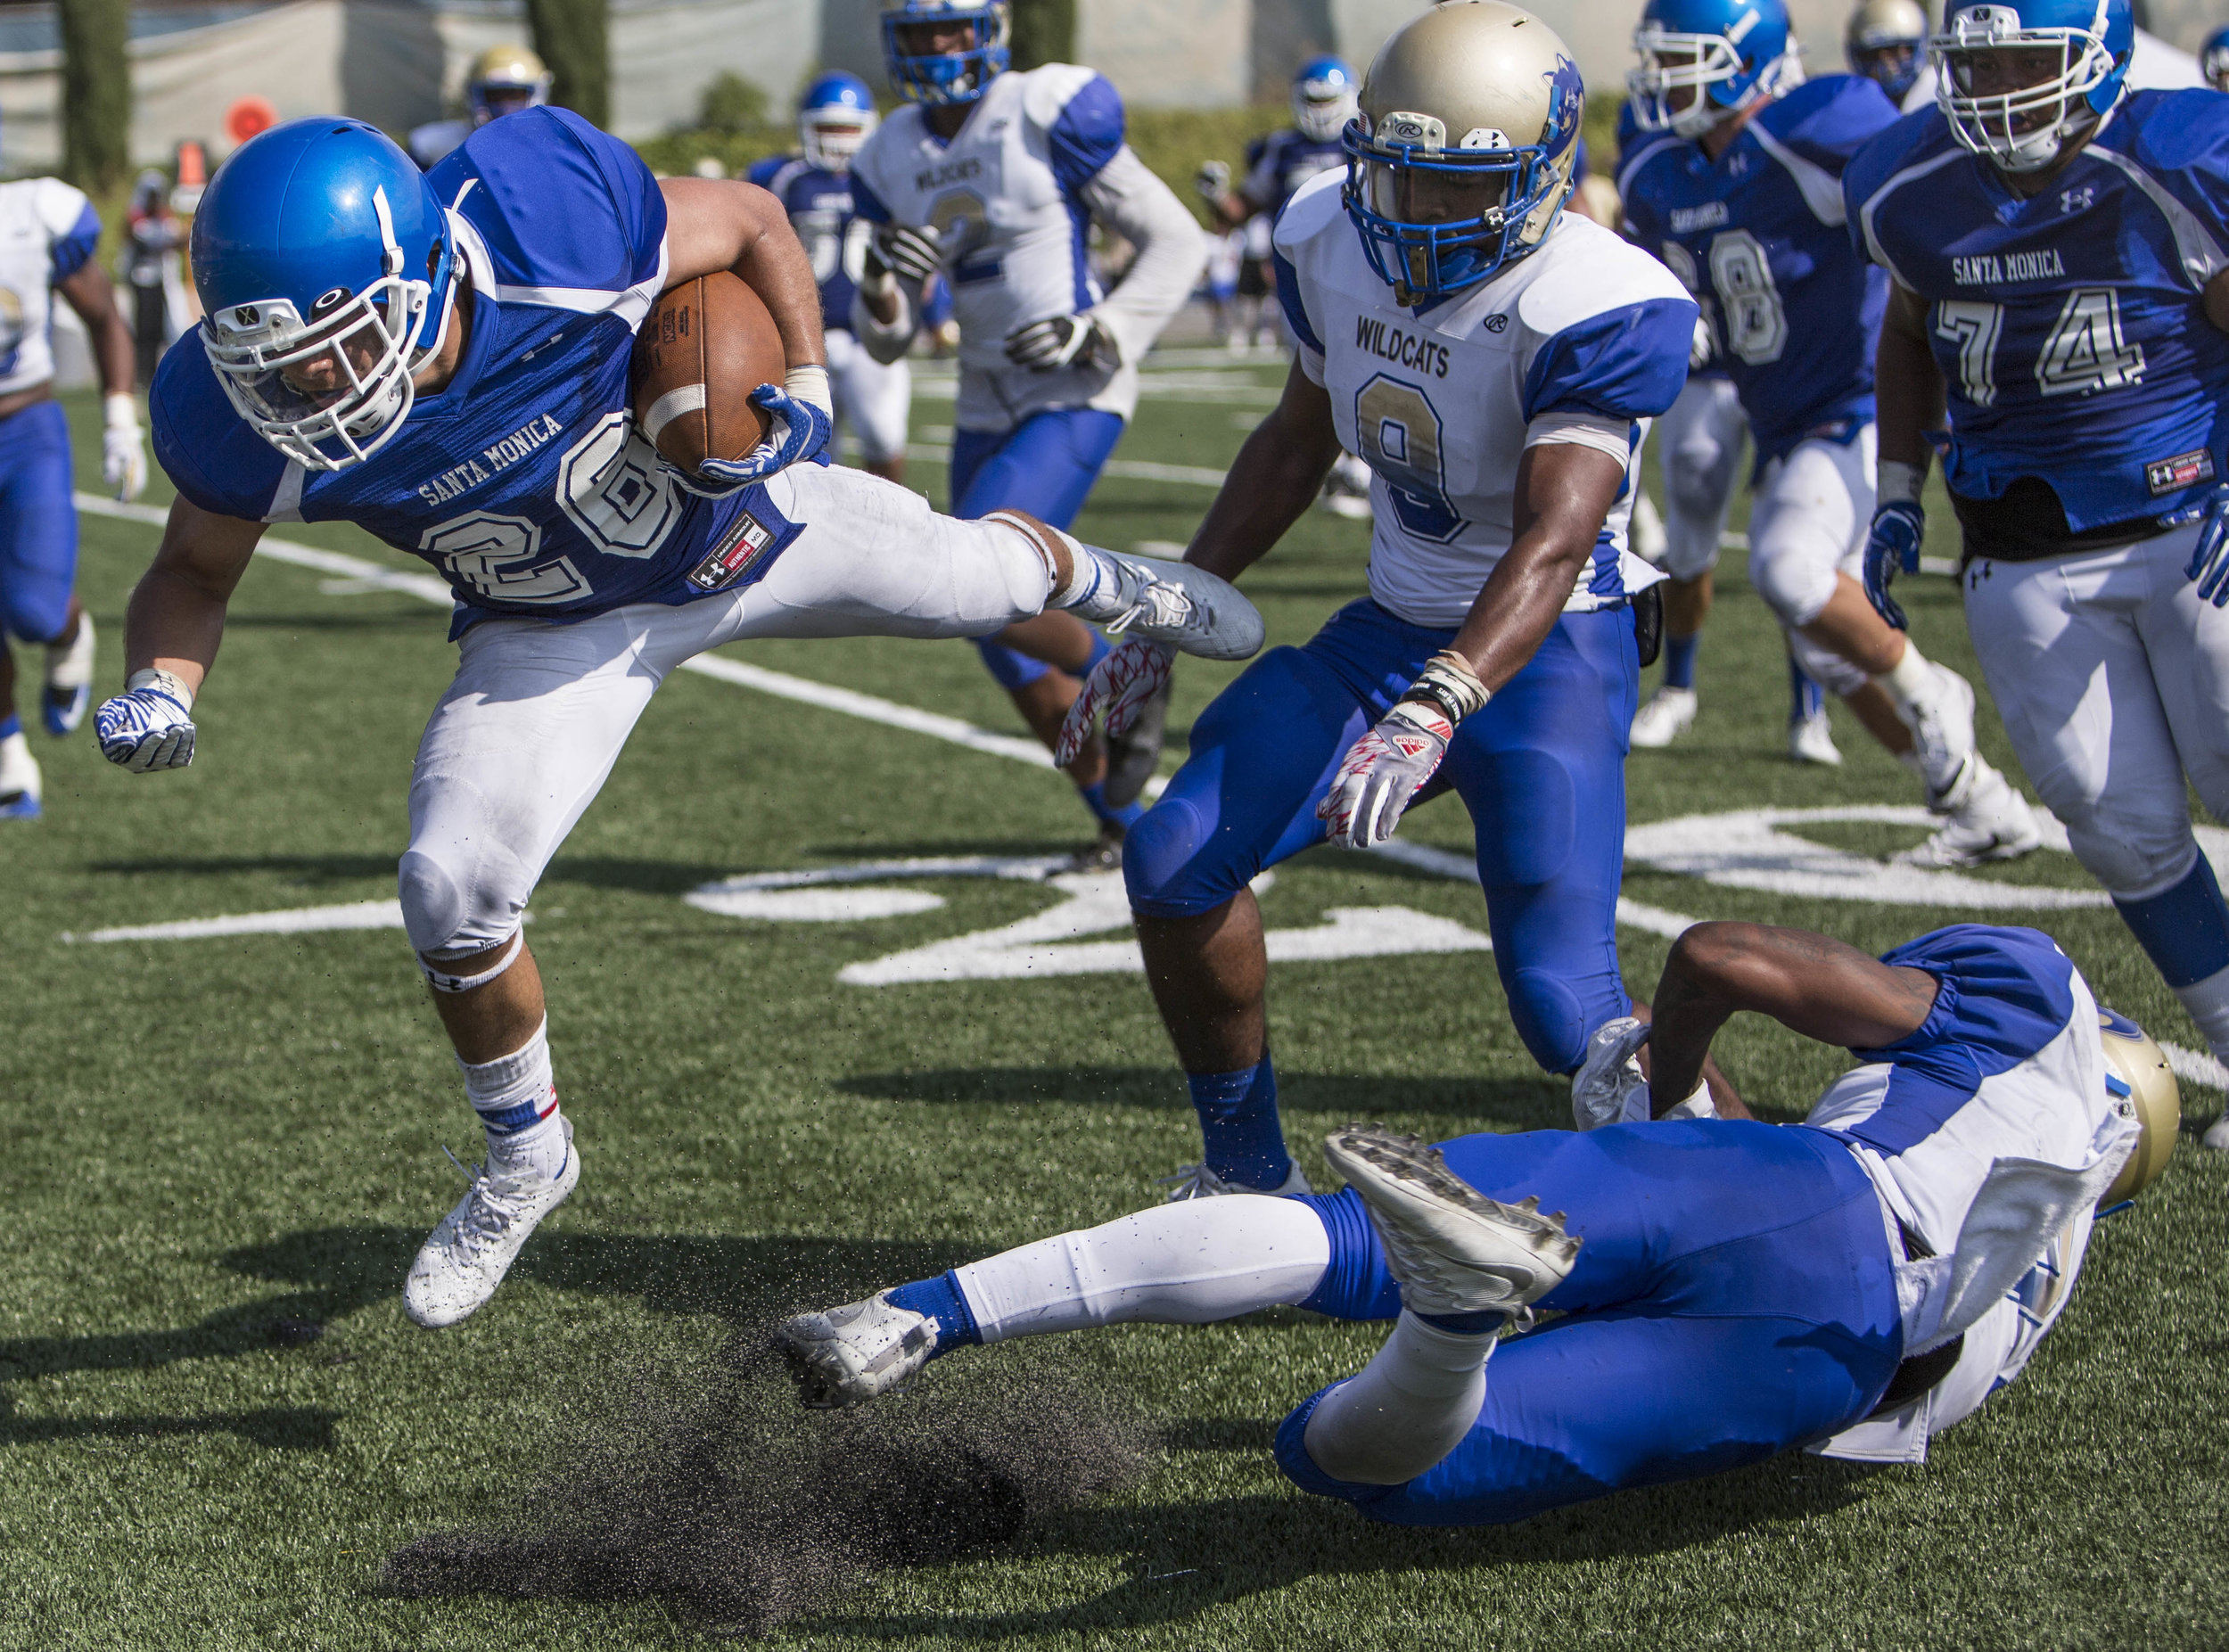  The Santa Monica College Corsairs Mens football Team player wide reciever Terrence Jones II (26) (blue,left) fights for yards after a complted pass against The West La College Wildcats, September 2nd, 2017, at West La College in Culver City, CA. The